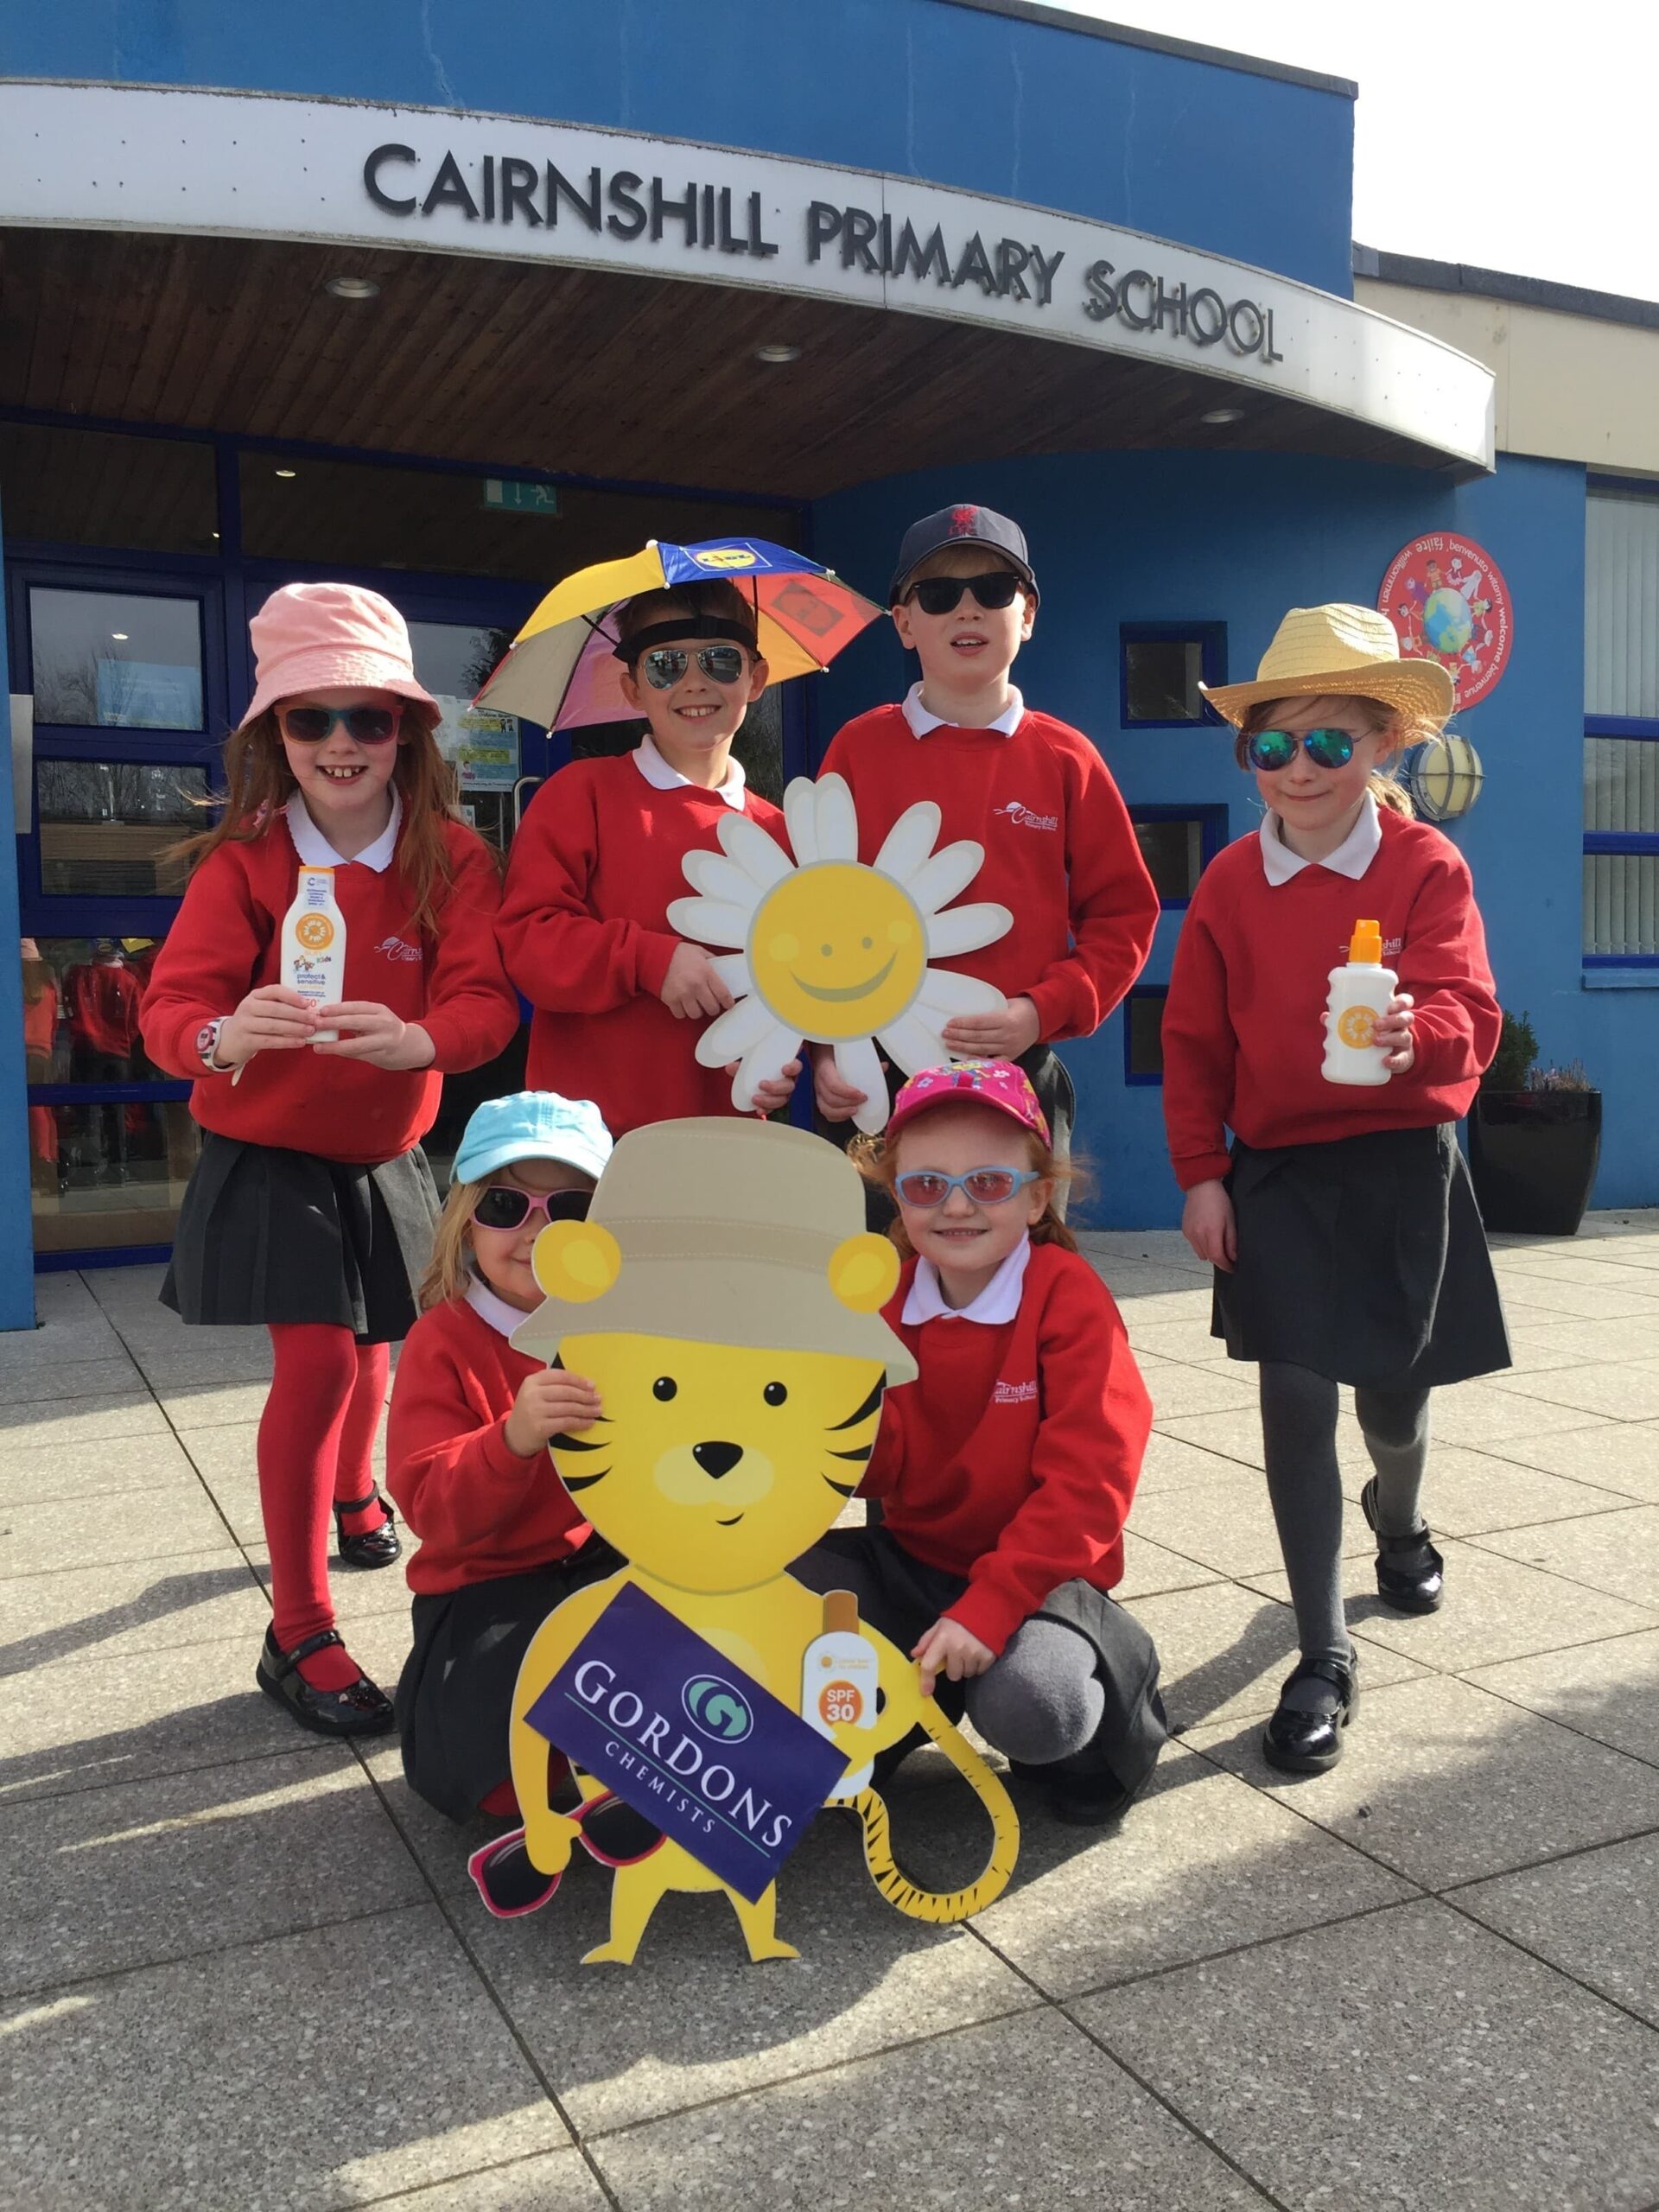 Hats and Shades - Cairnshill Primary School